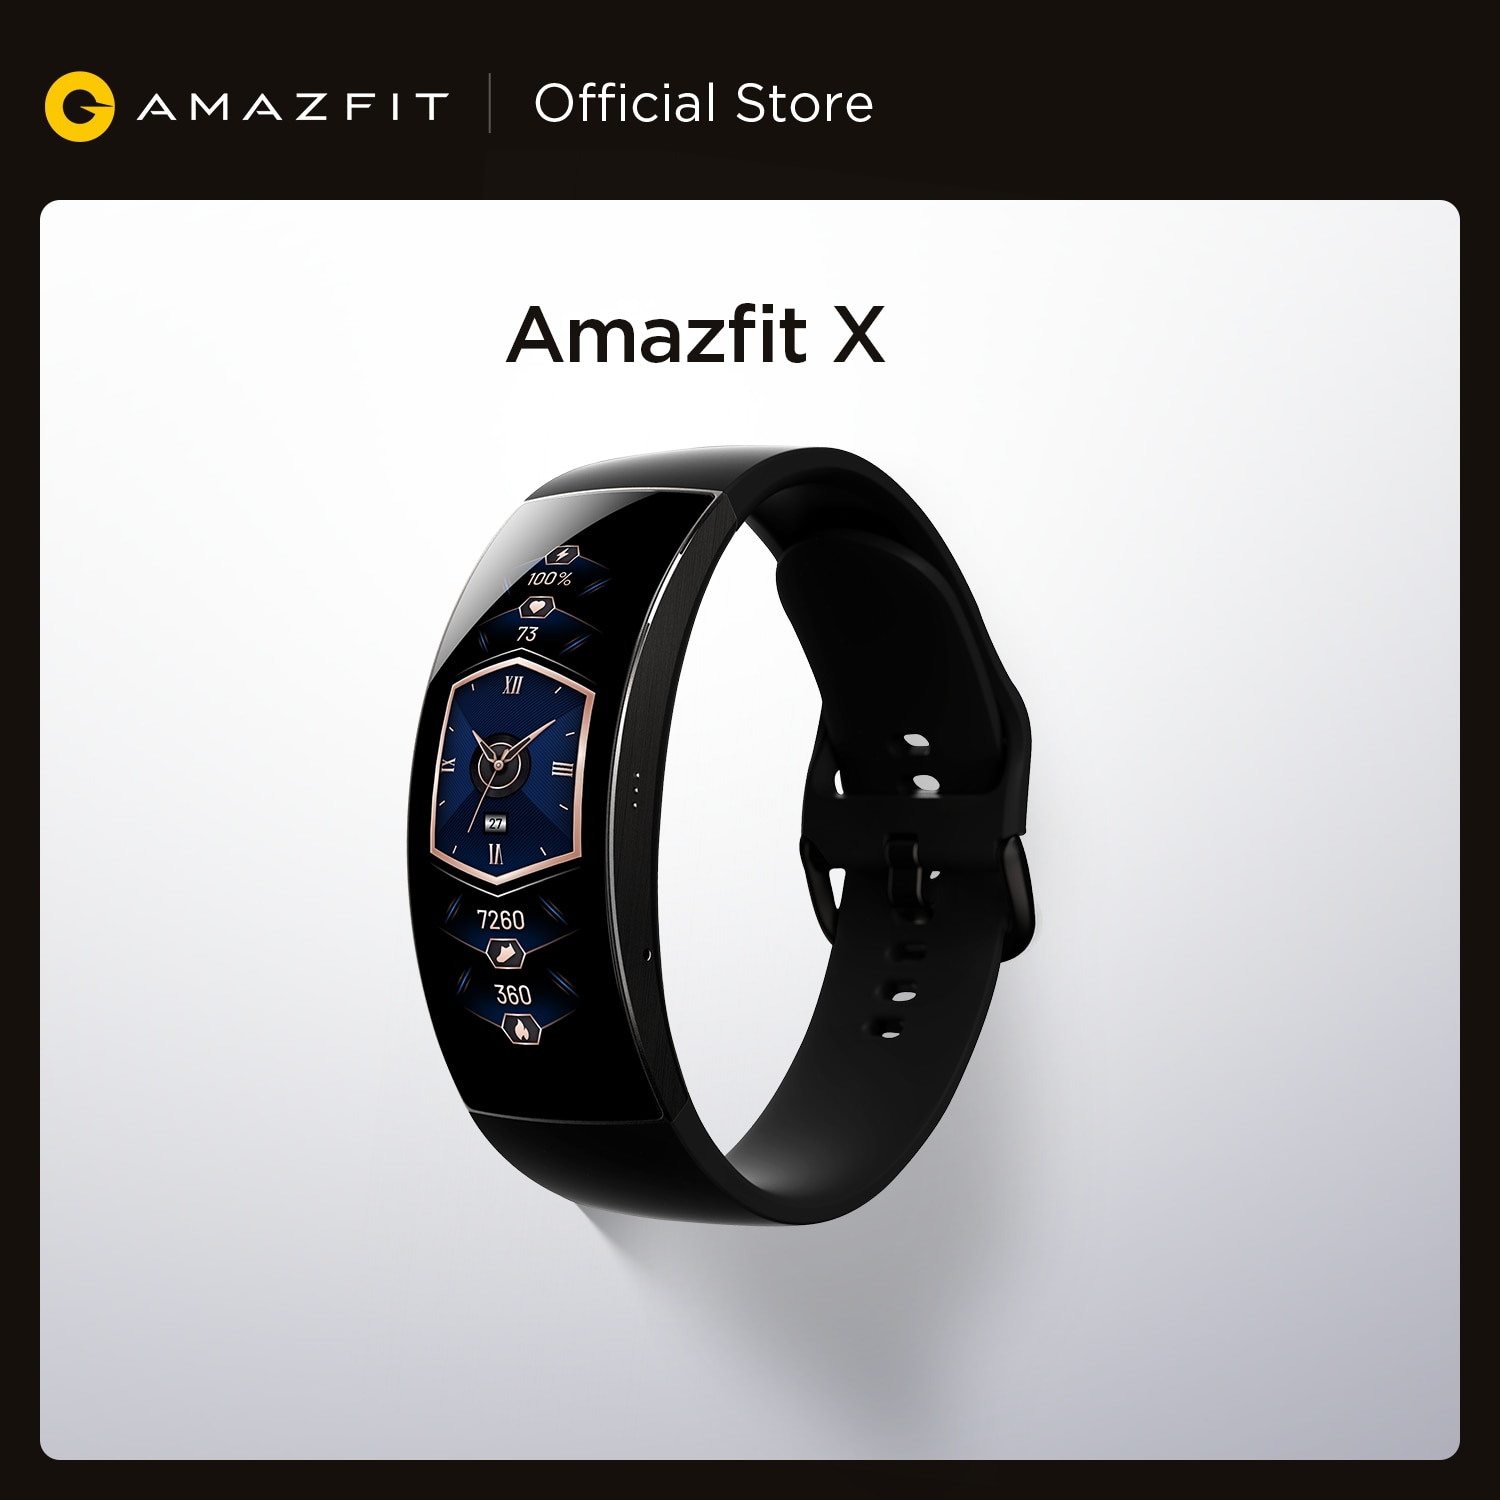 Amazfit X Smartwatch Global Version Curved Screen Titanium Body Sleep Monitoring 5ATM Water Resistant Multi Sports Modes